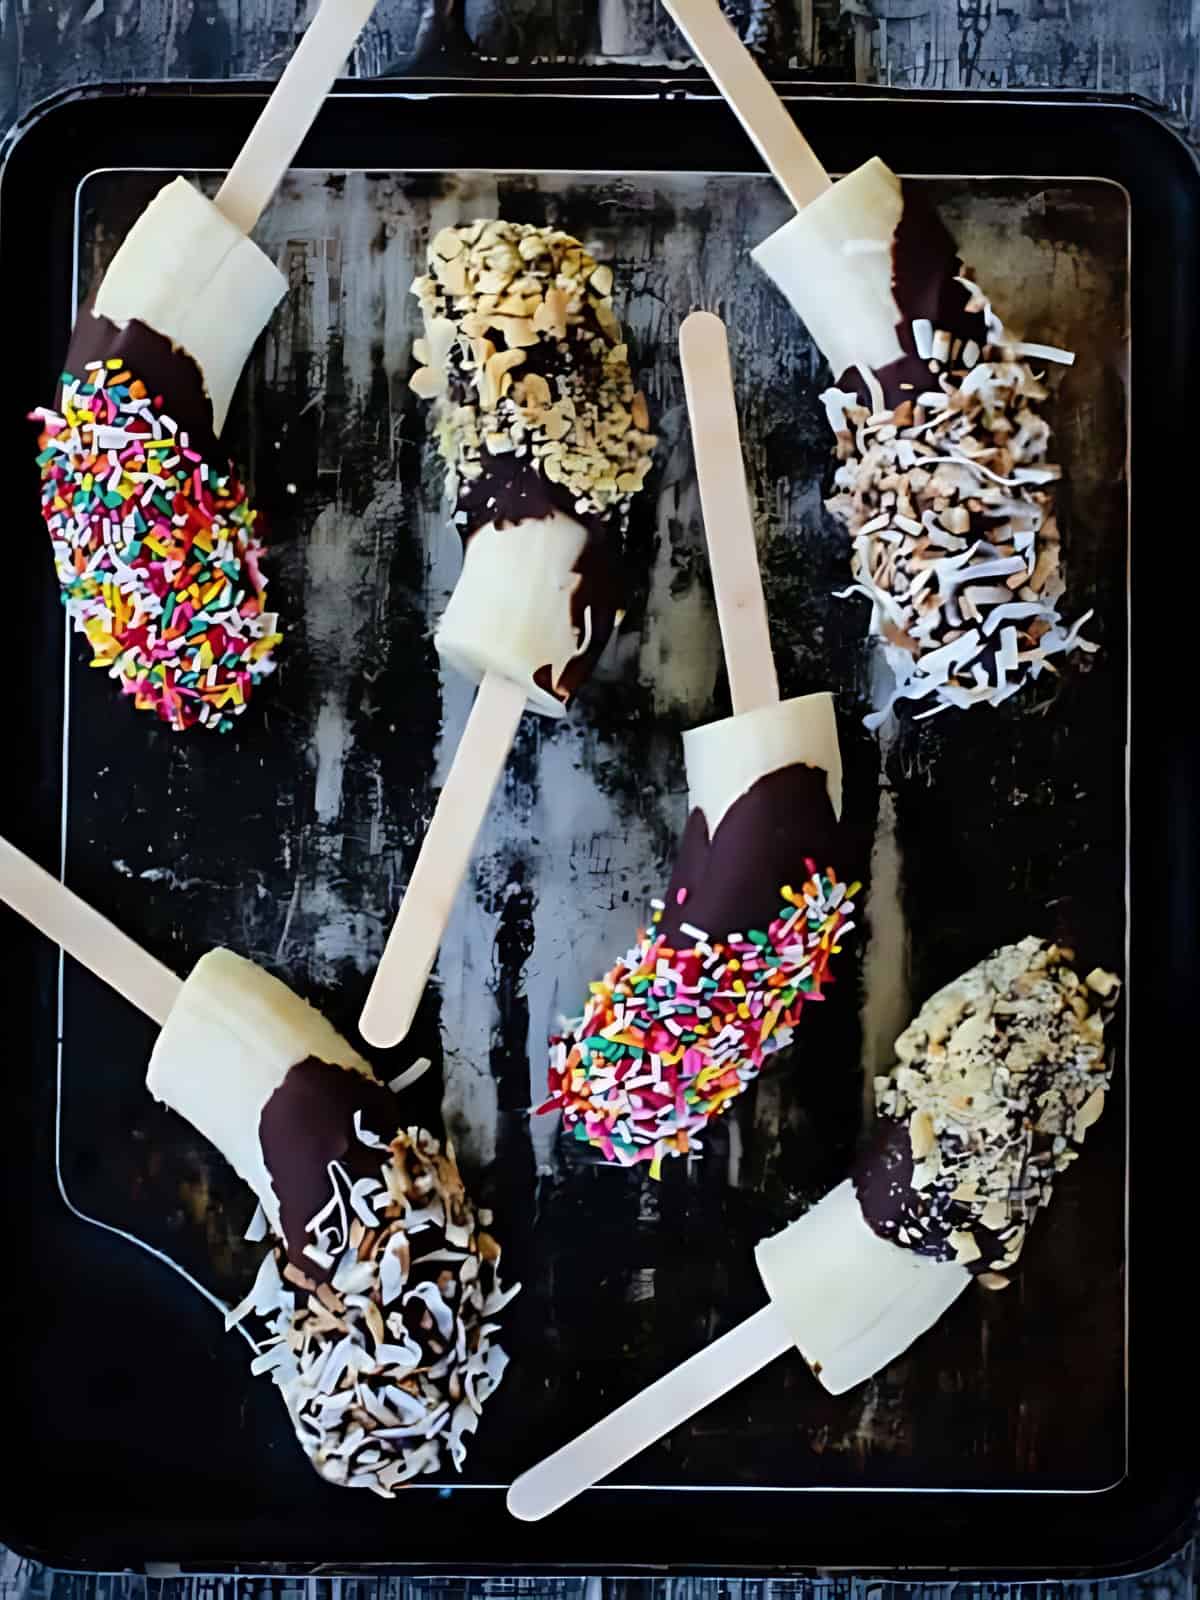 Frozen banana pops on a popsicle stick covered with chocolate and a variety of sprinkled sweets.